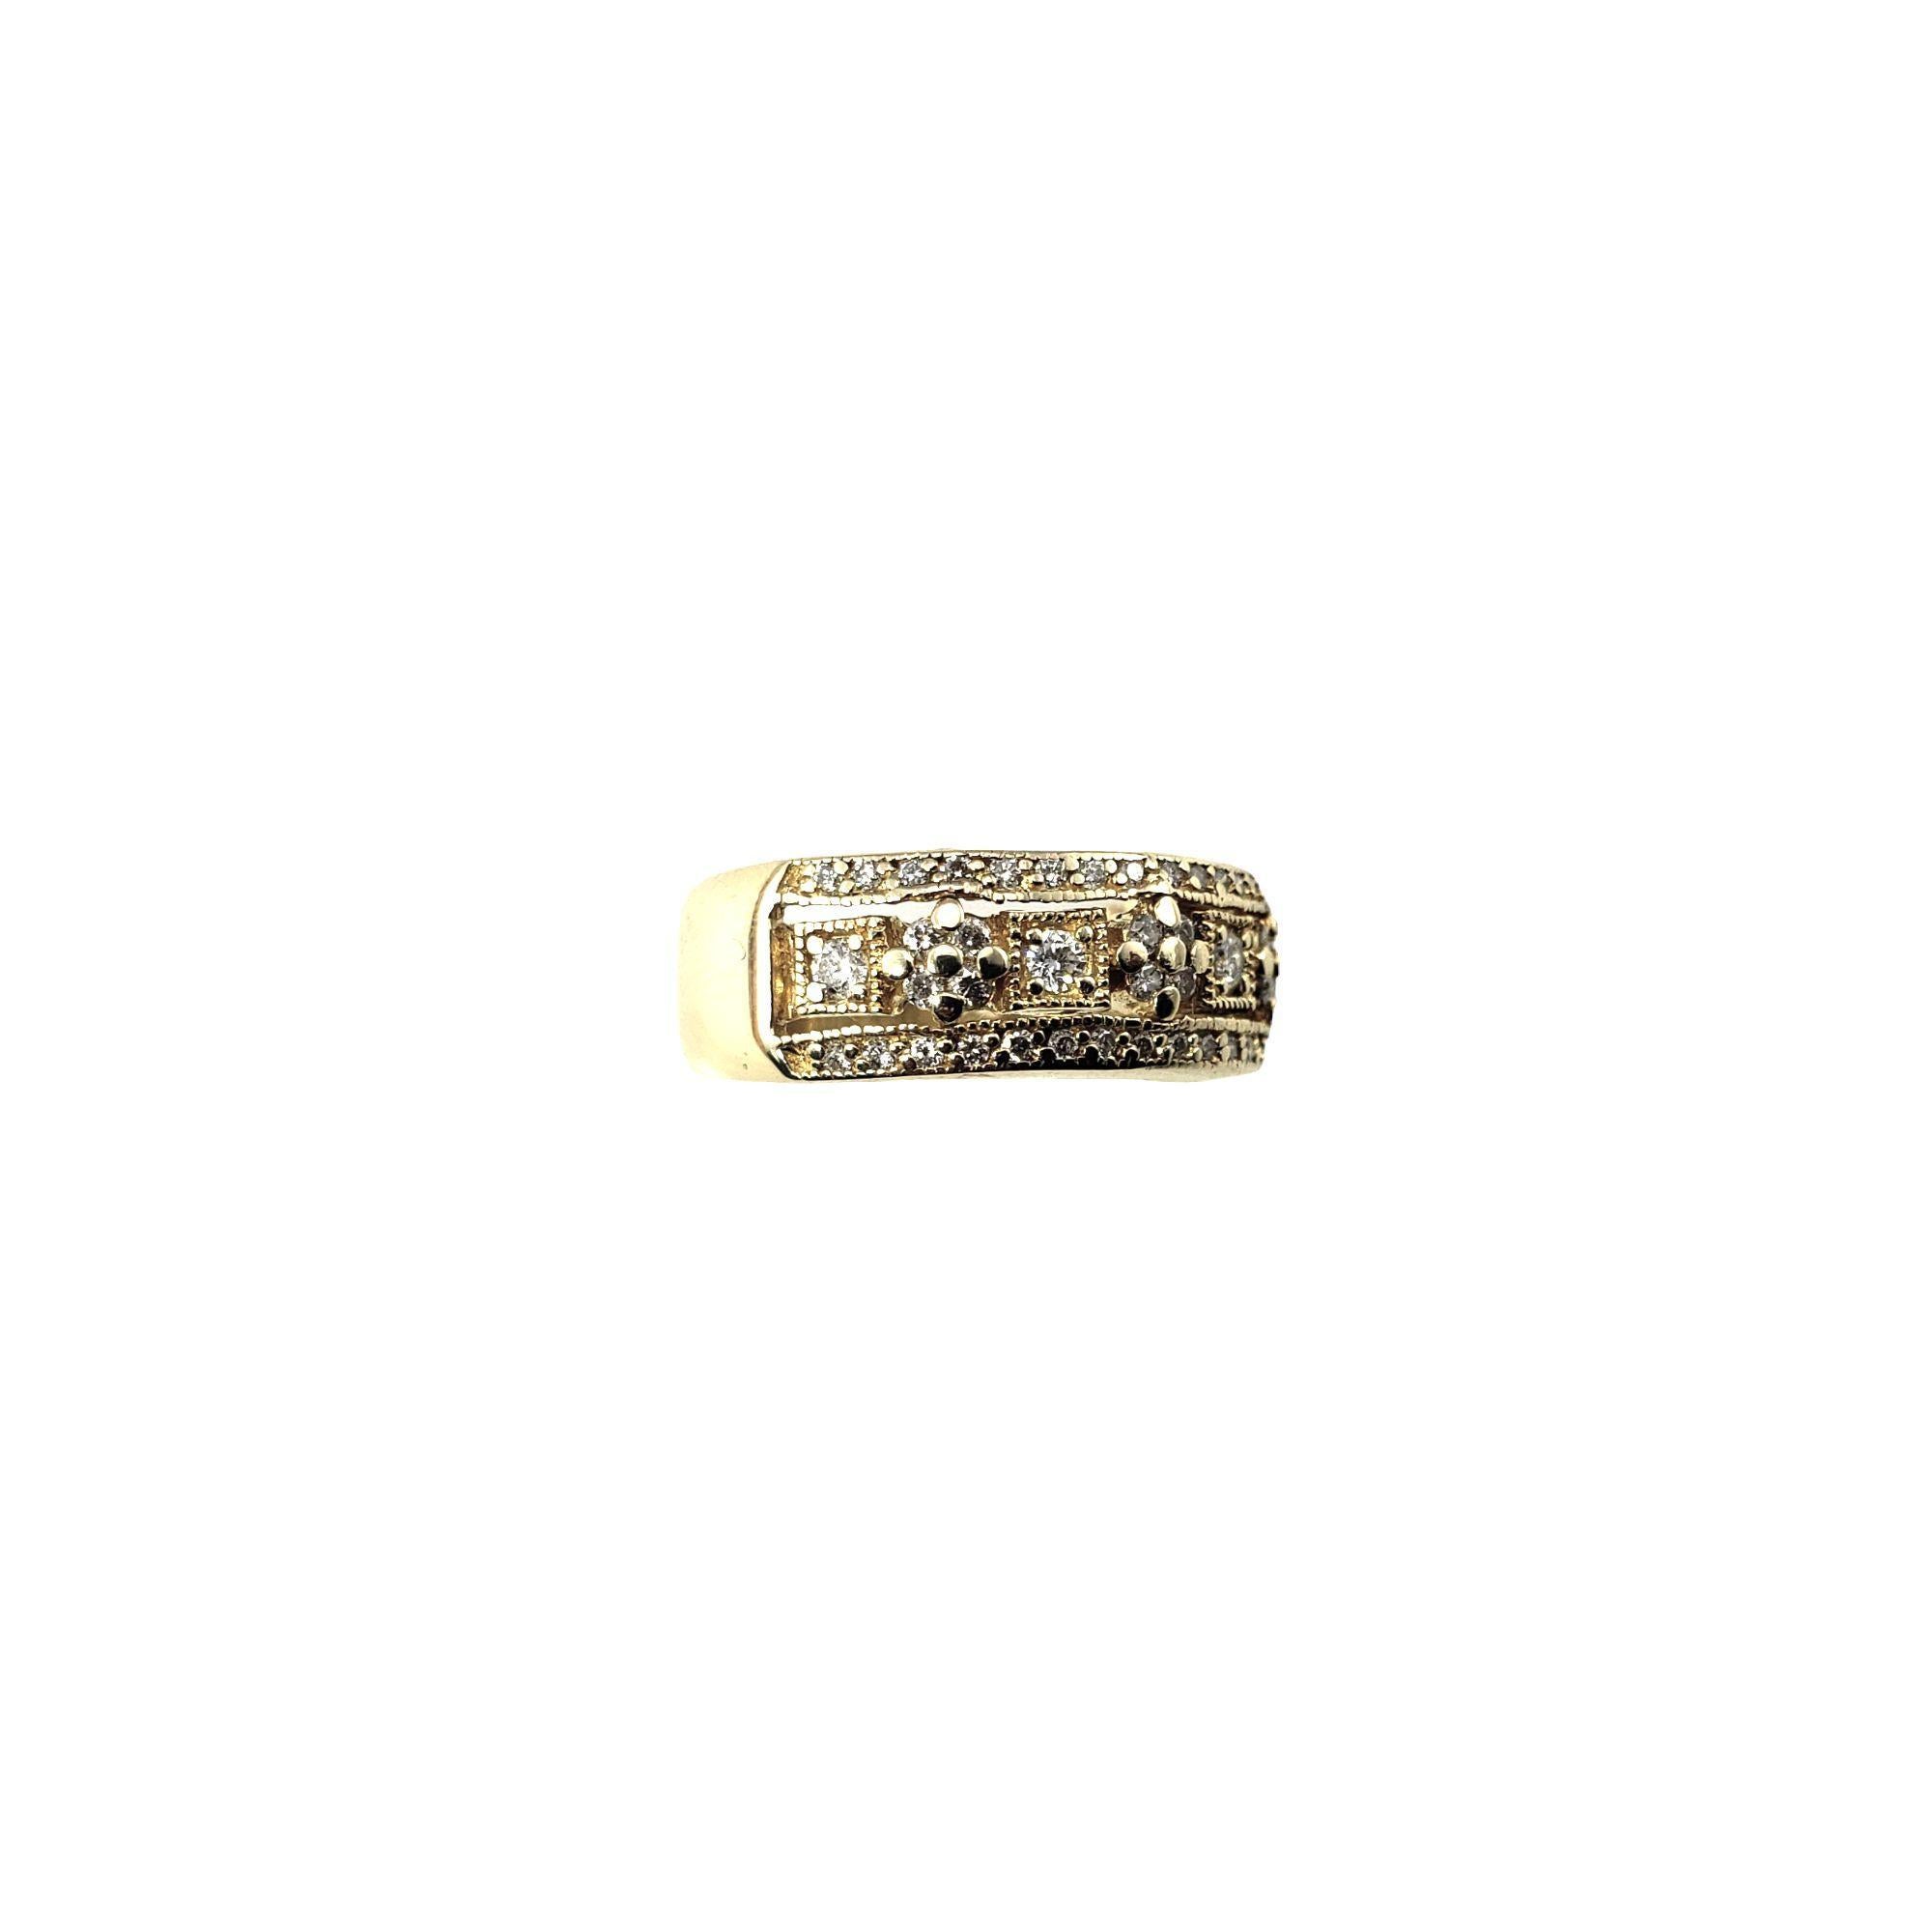 14 Karat Yellow Gold and Diamond Band Ring Size 7-

This sparkling band features 48 round brilliant cut diamonds set in beautifully detailed 14K yellow gold. Width: 7 mm.

Inner inscription reads: 